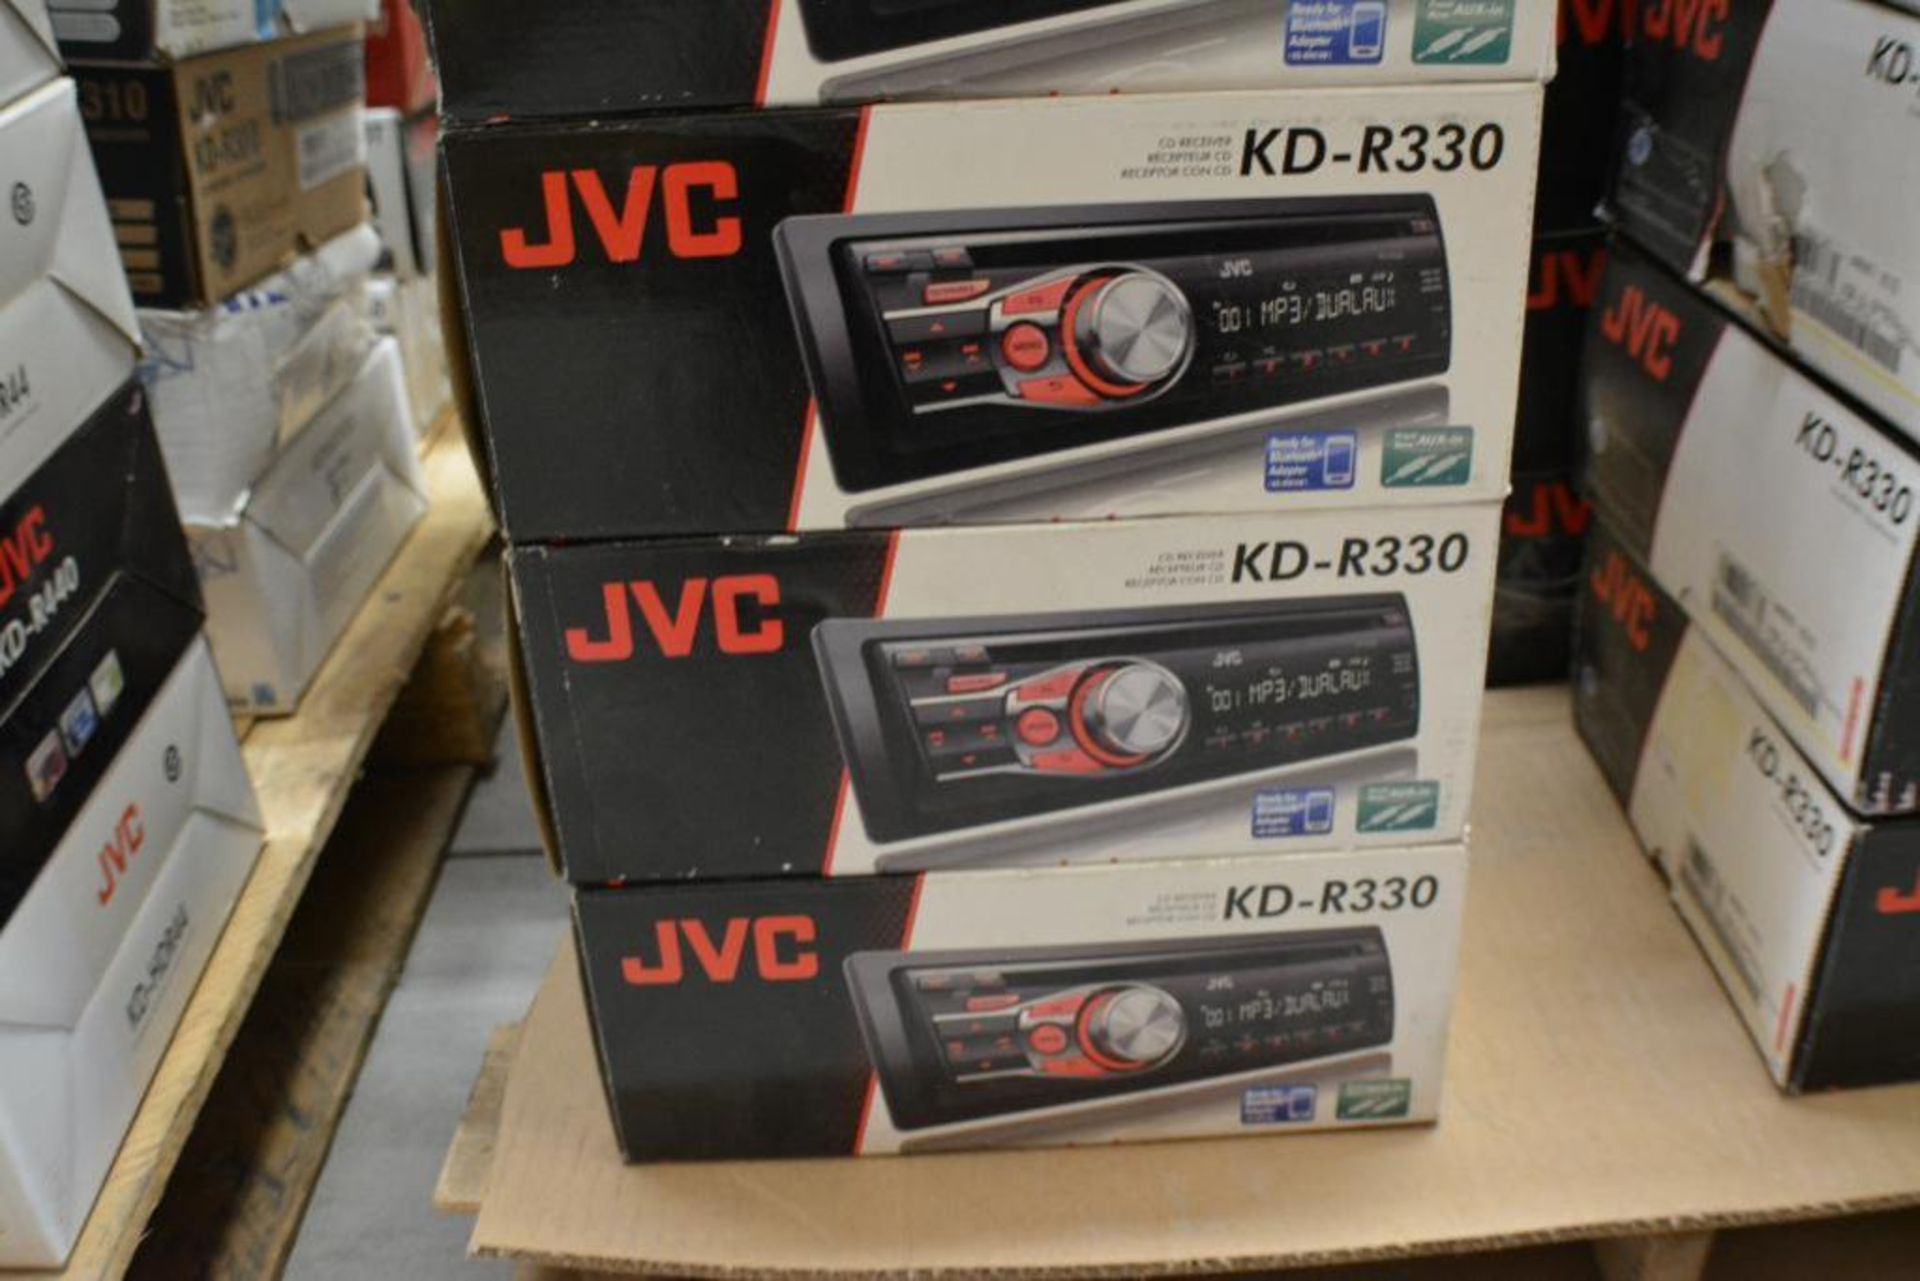 JVC Car Stereo Model KD-R330 Single-DIN Car Stereo w/ Dual Aux Inputs, 3-Band Equalizer & 6 Station - Image 2 of 2